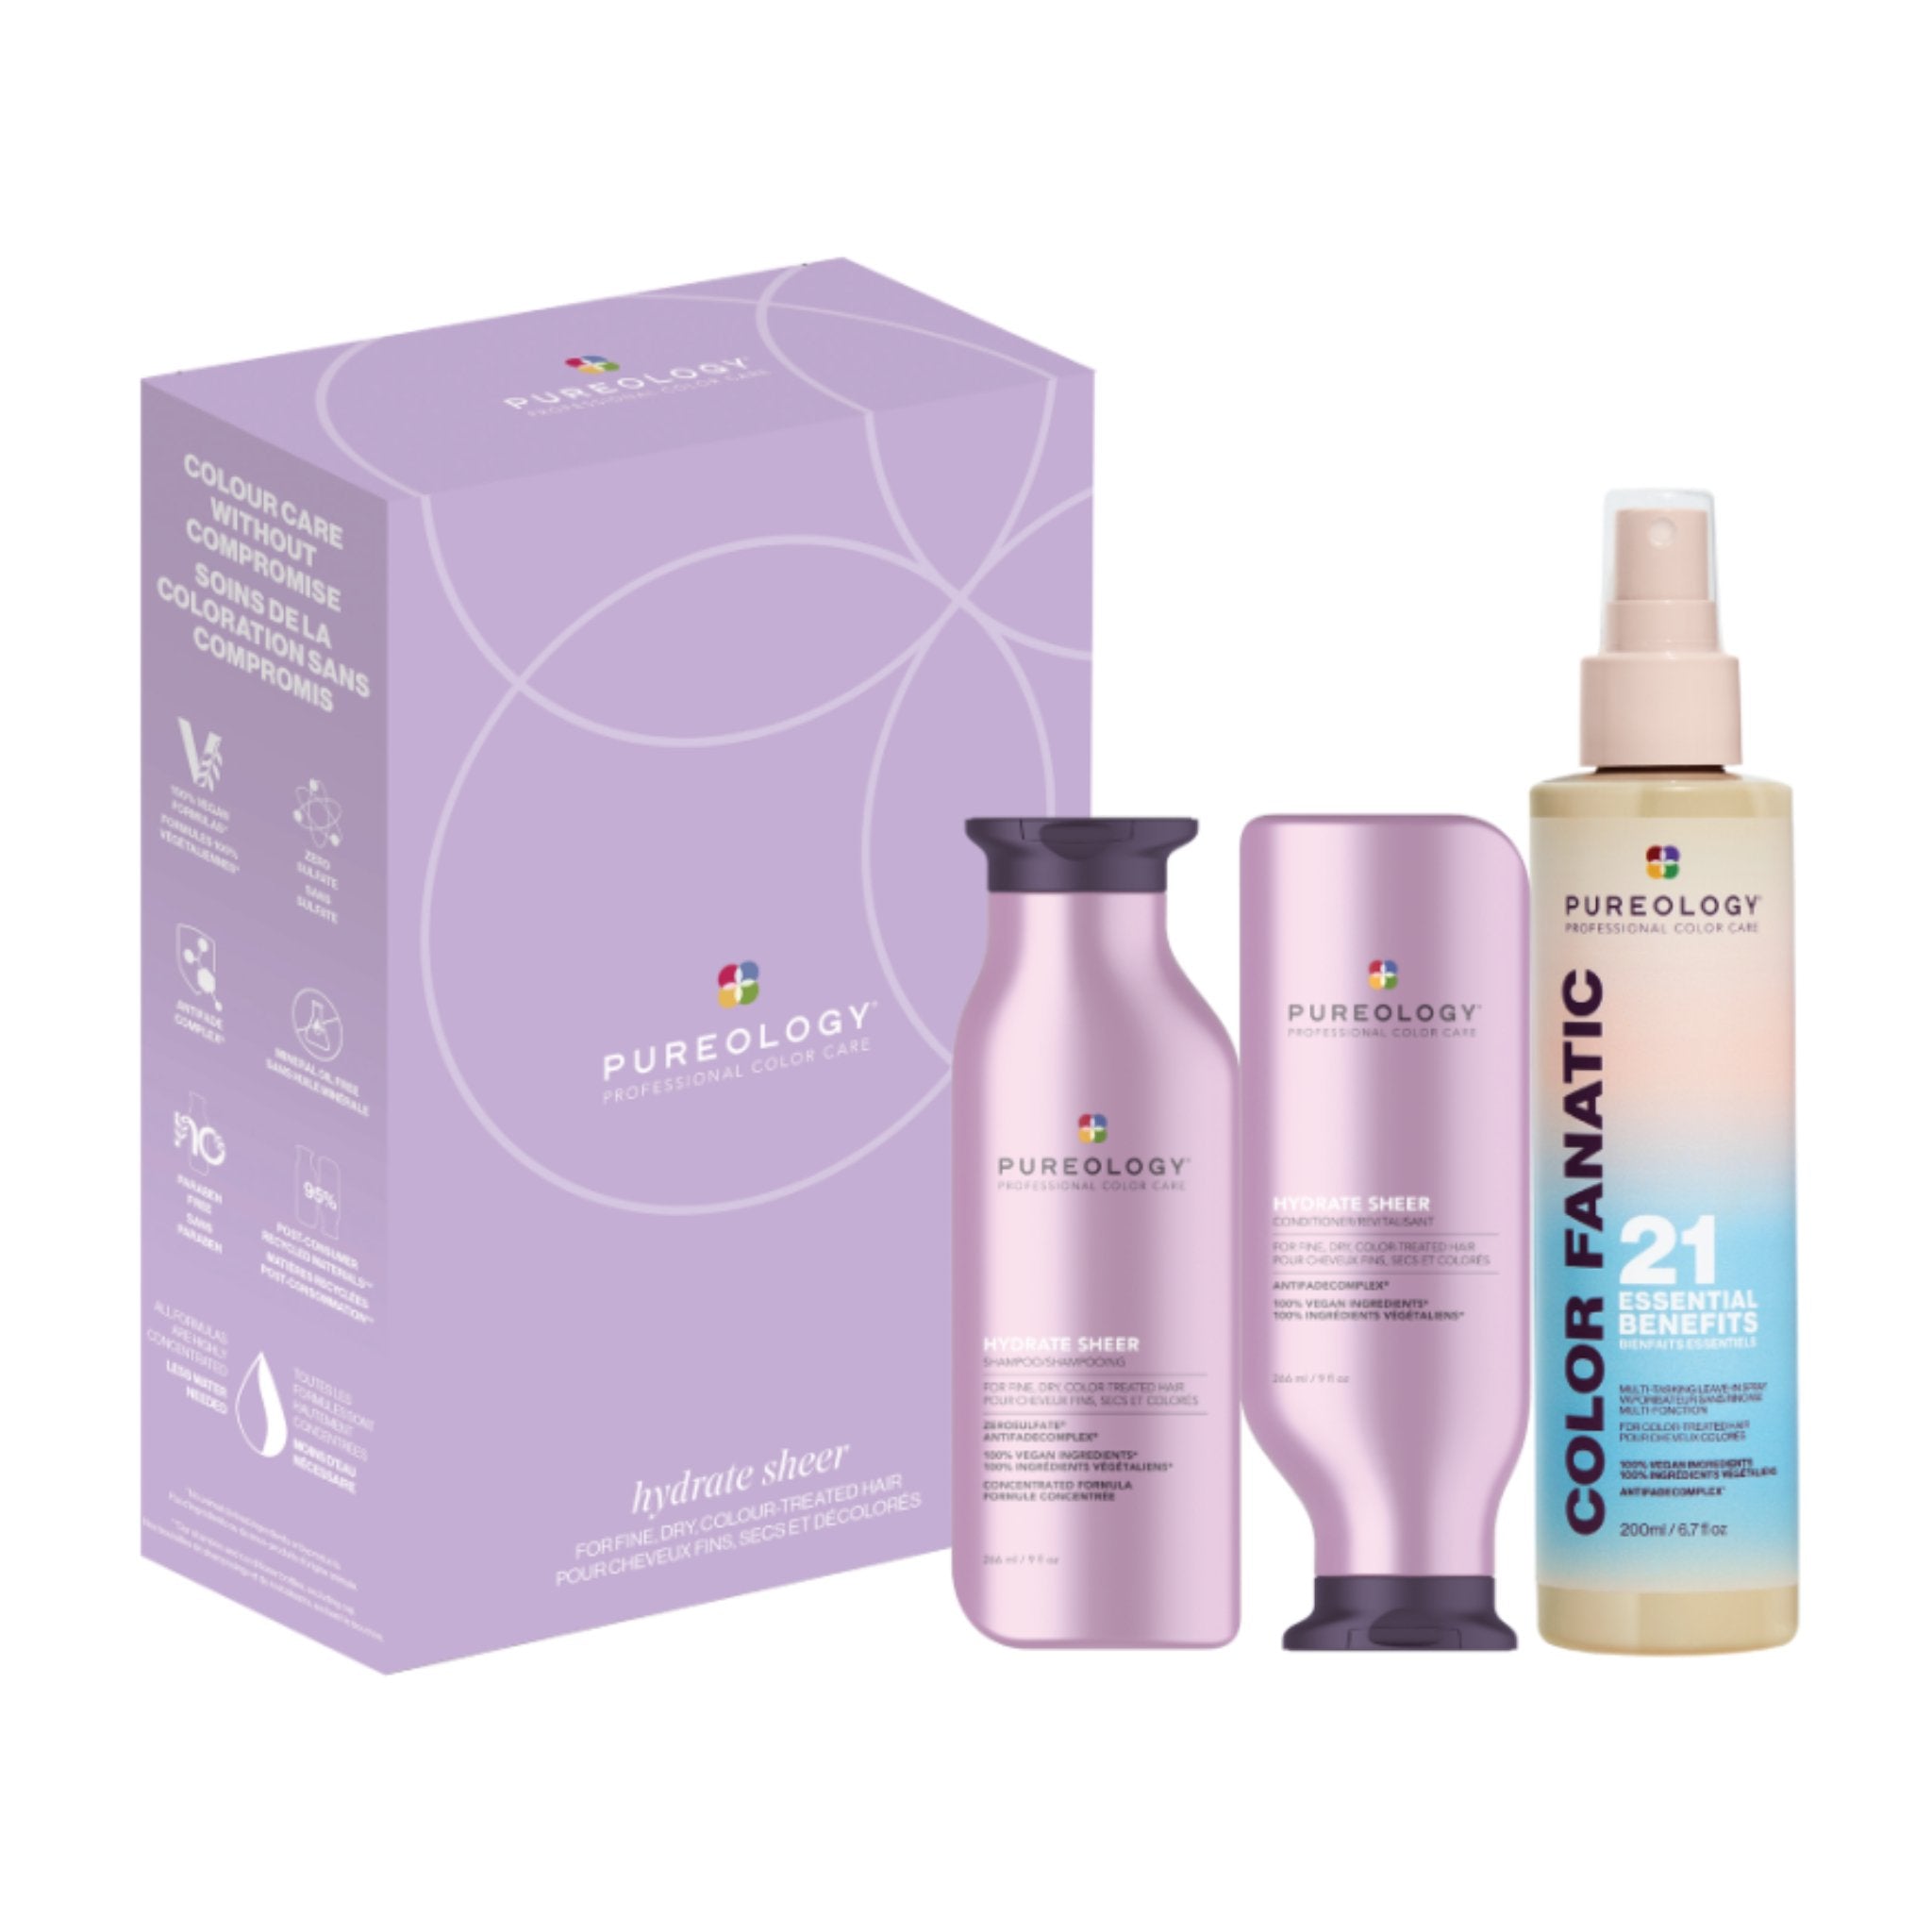 Pureology.Coffret Trio Hydrate sheer - Concept C. Shop